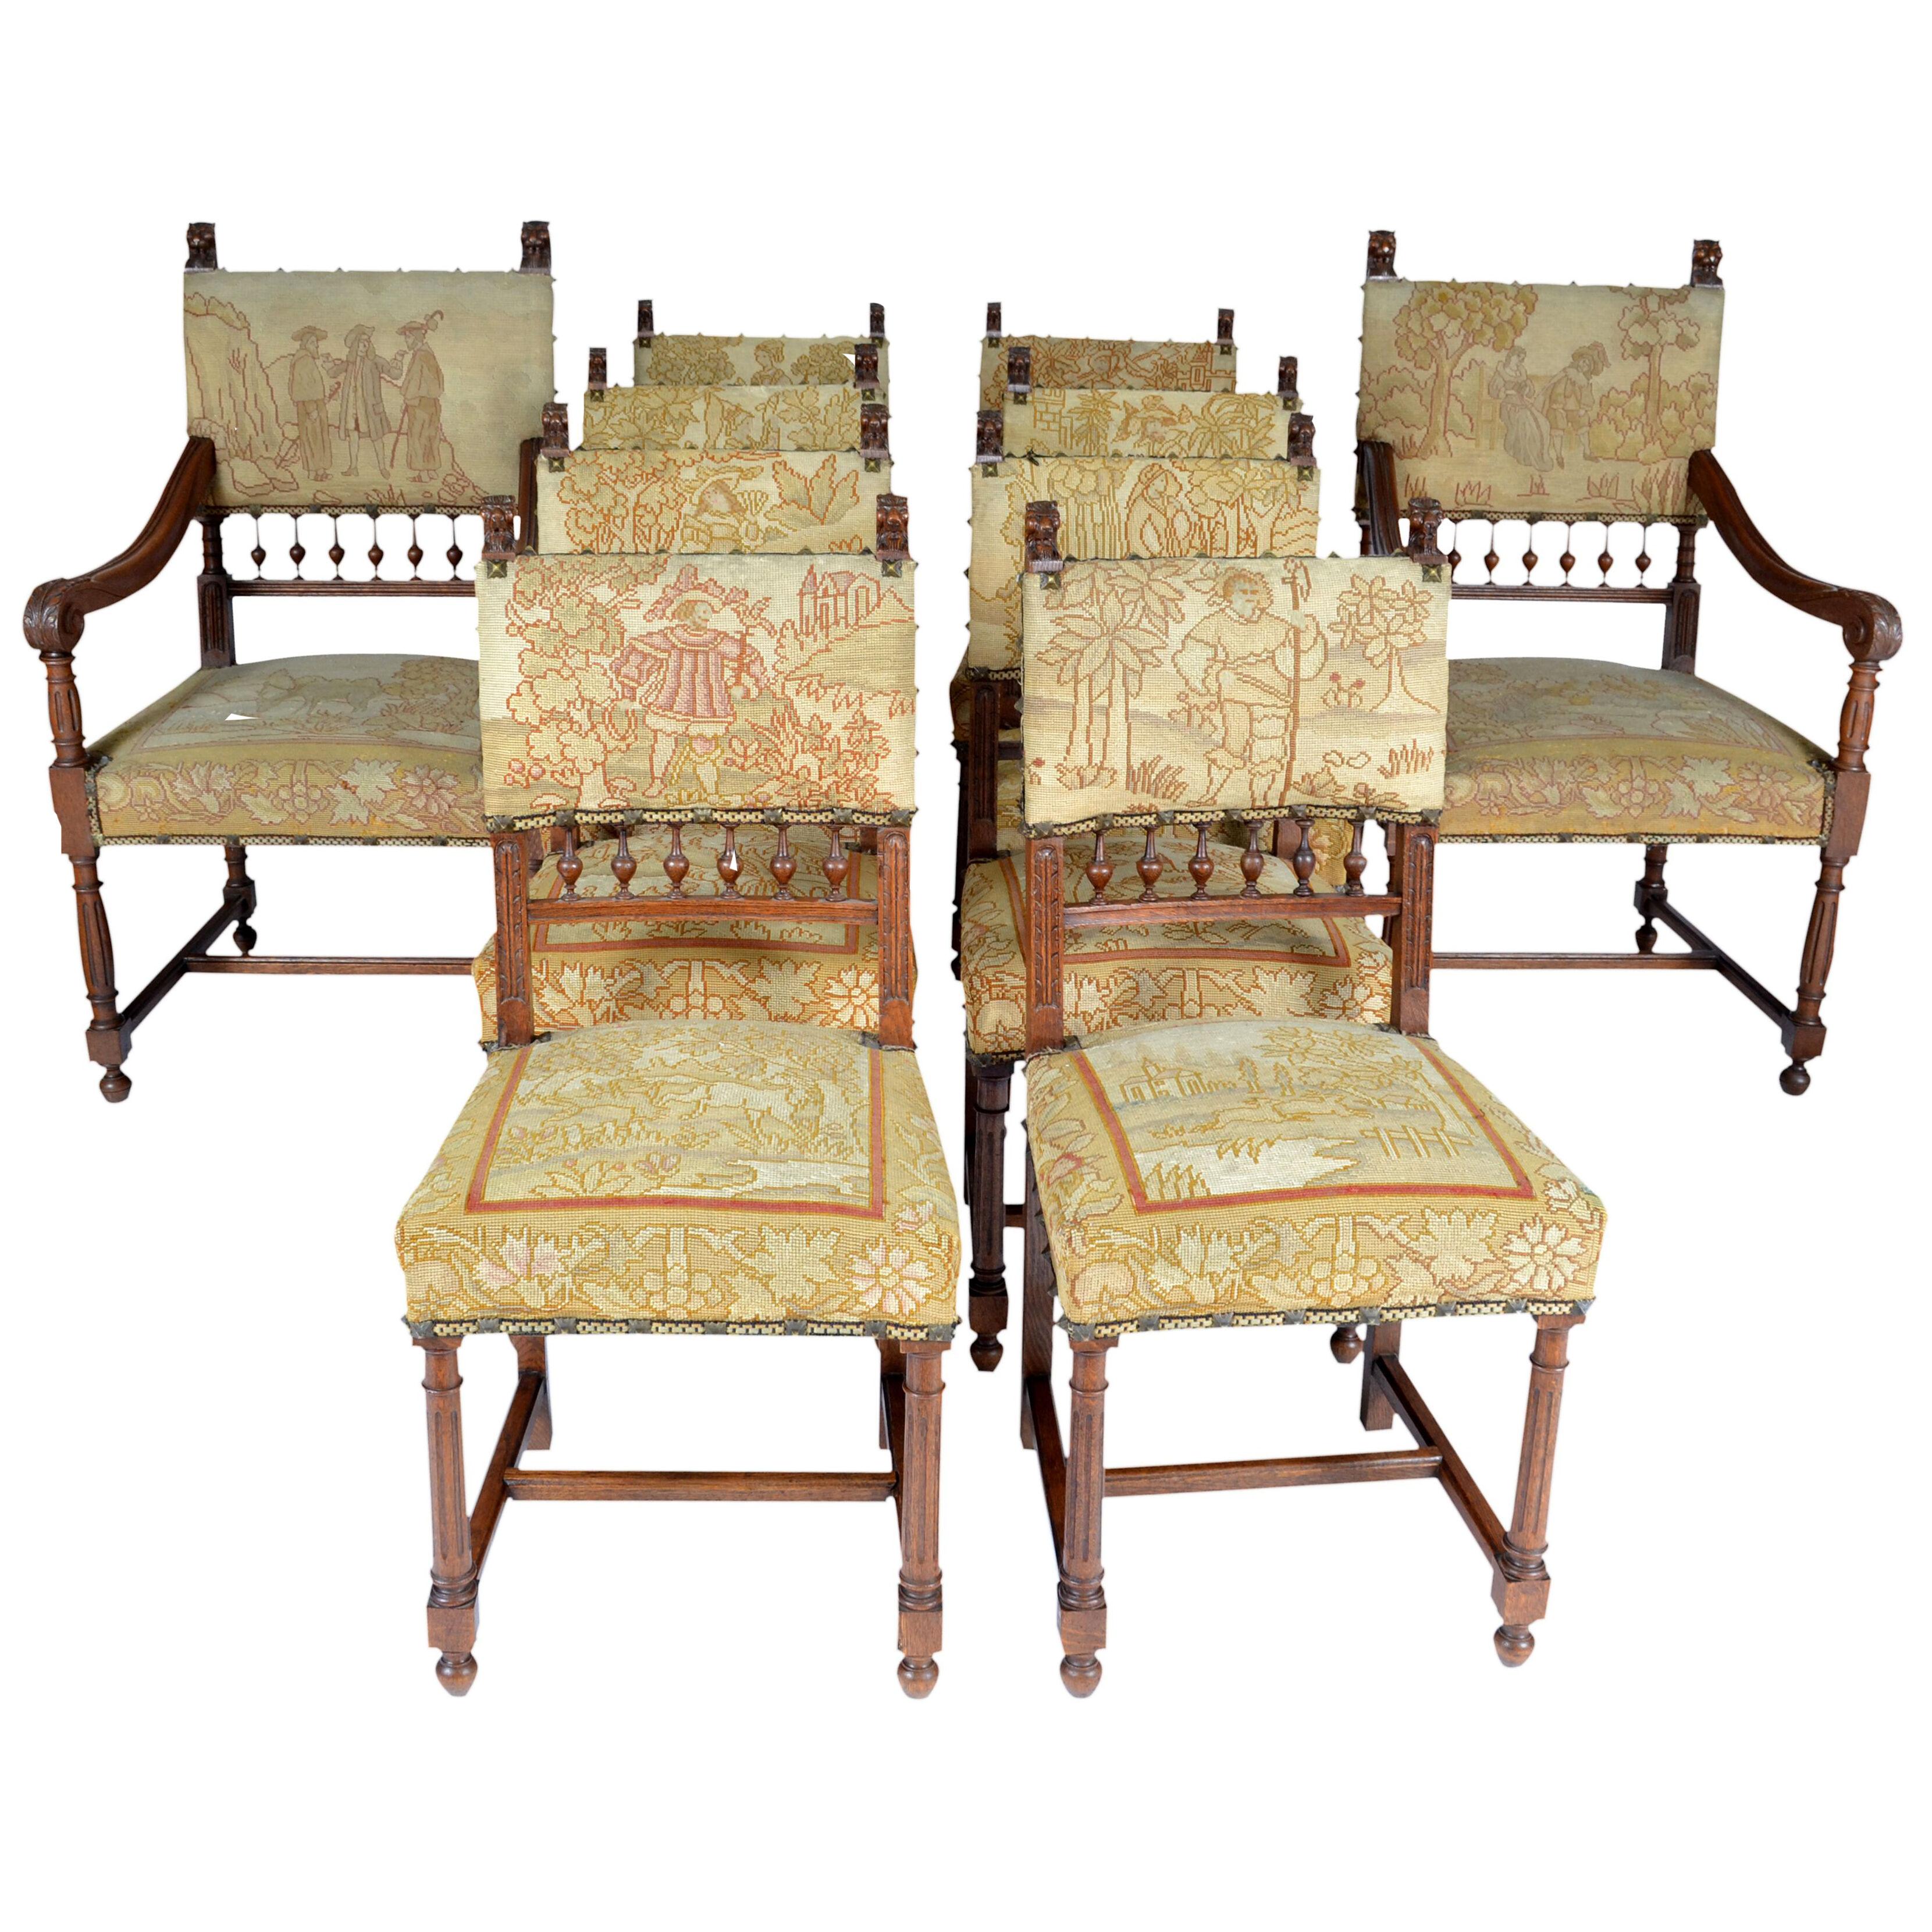 Set of 10 Needle Petit Point Upholstered Chairs in Henry II style. Walnut 